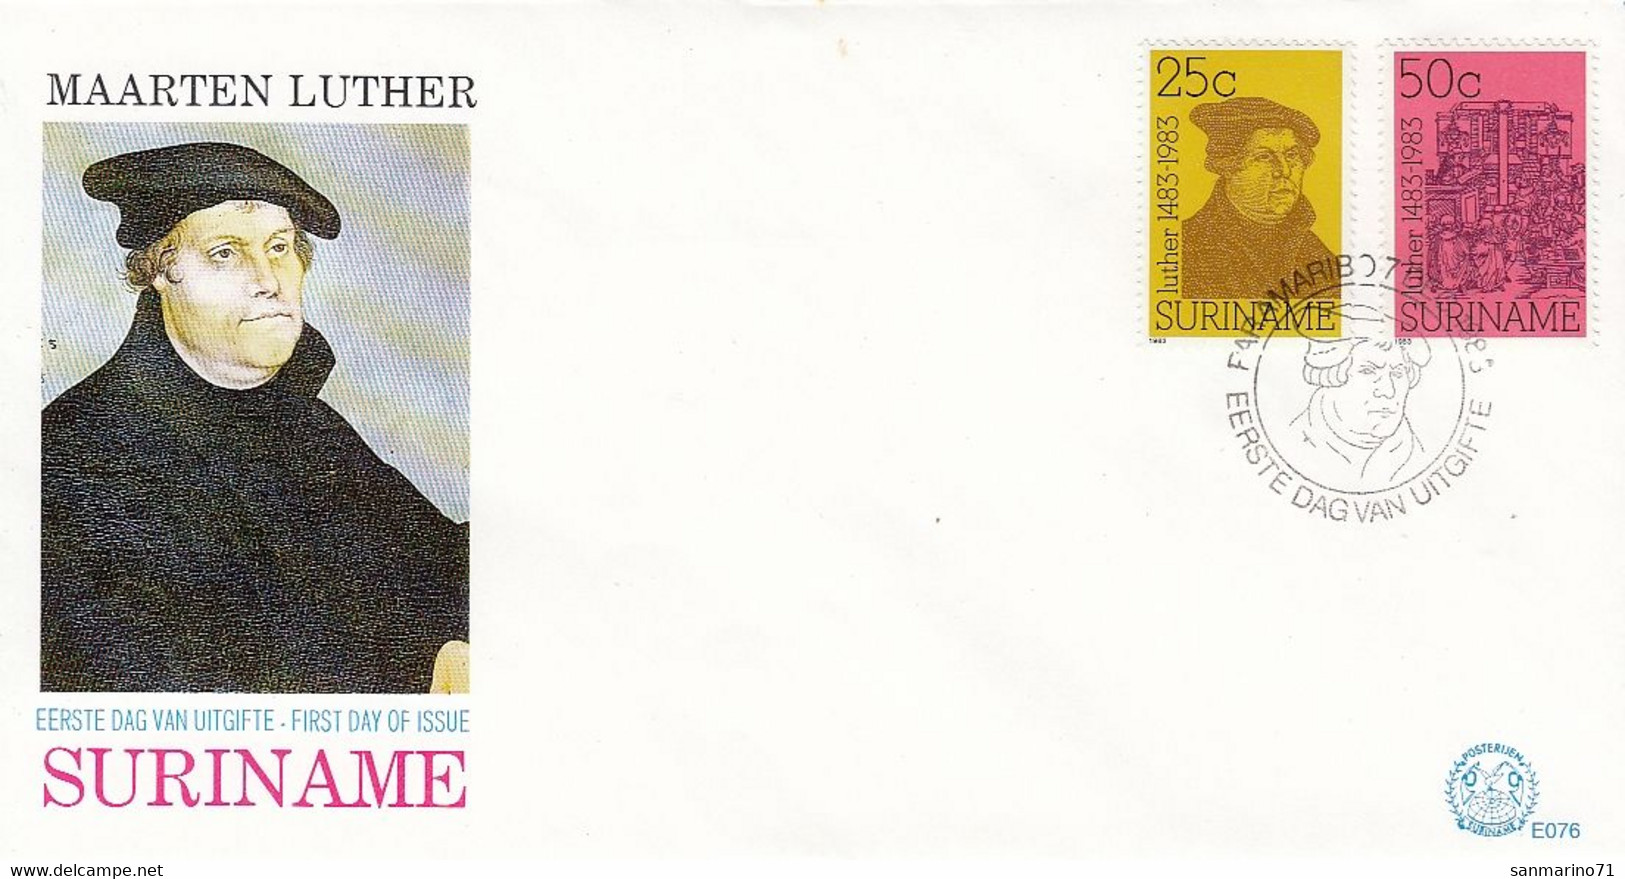 FDC SURINAM 1063-1064 - Martin Luther King